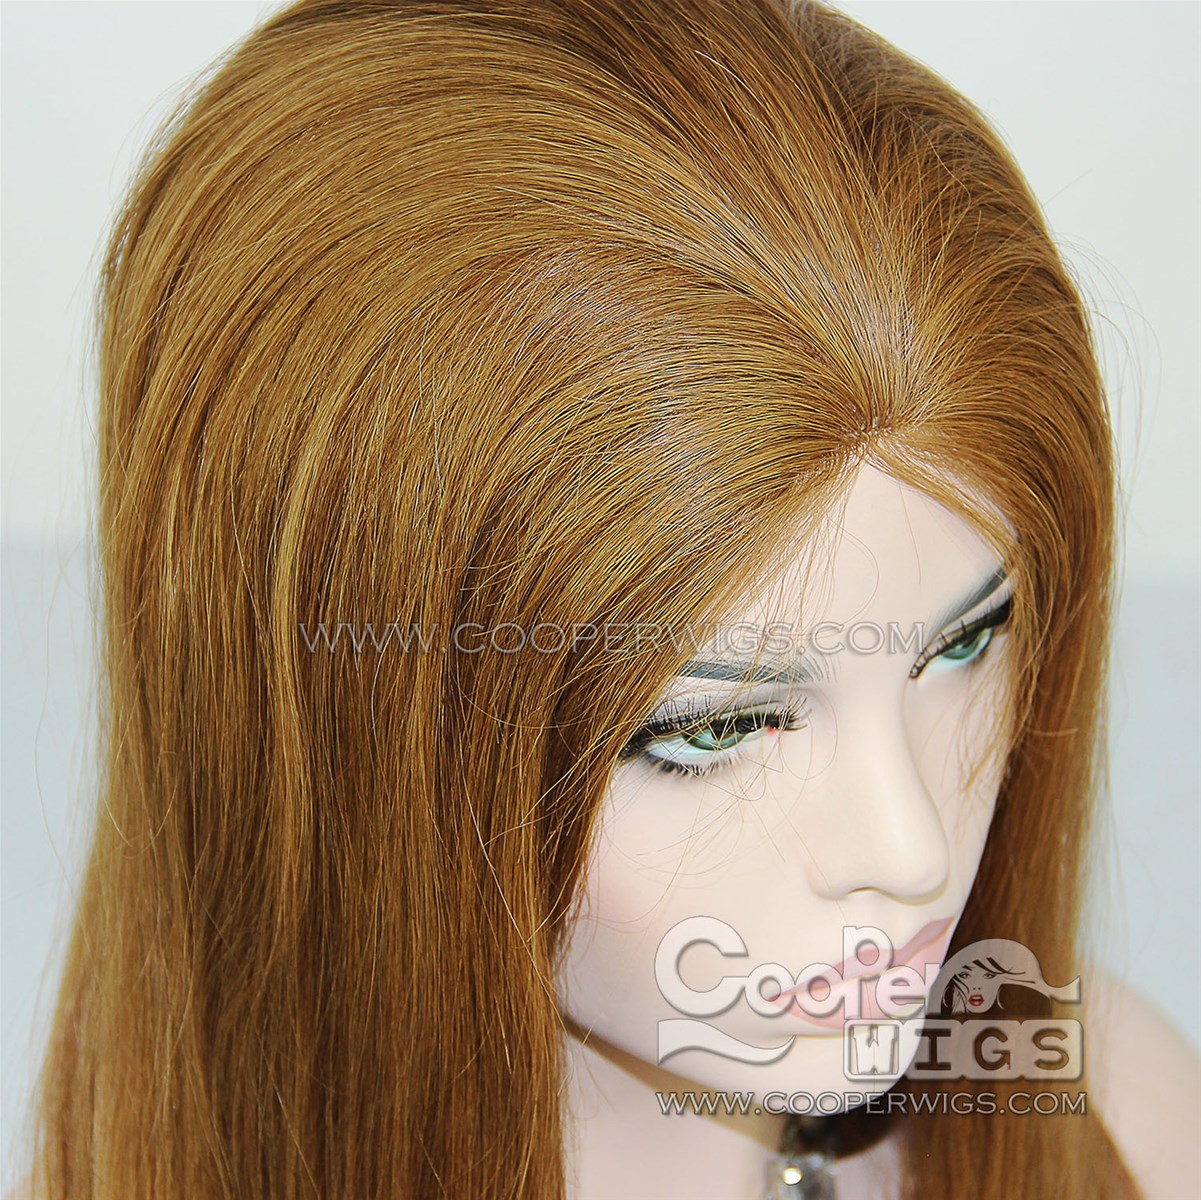 Cooper Wigs Lace Front Human Hair Wigs European Virgin Straight for Women